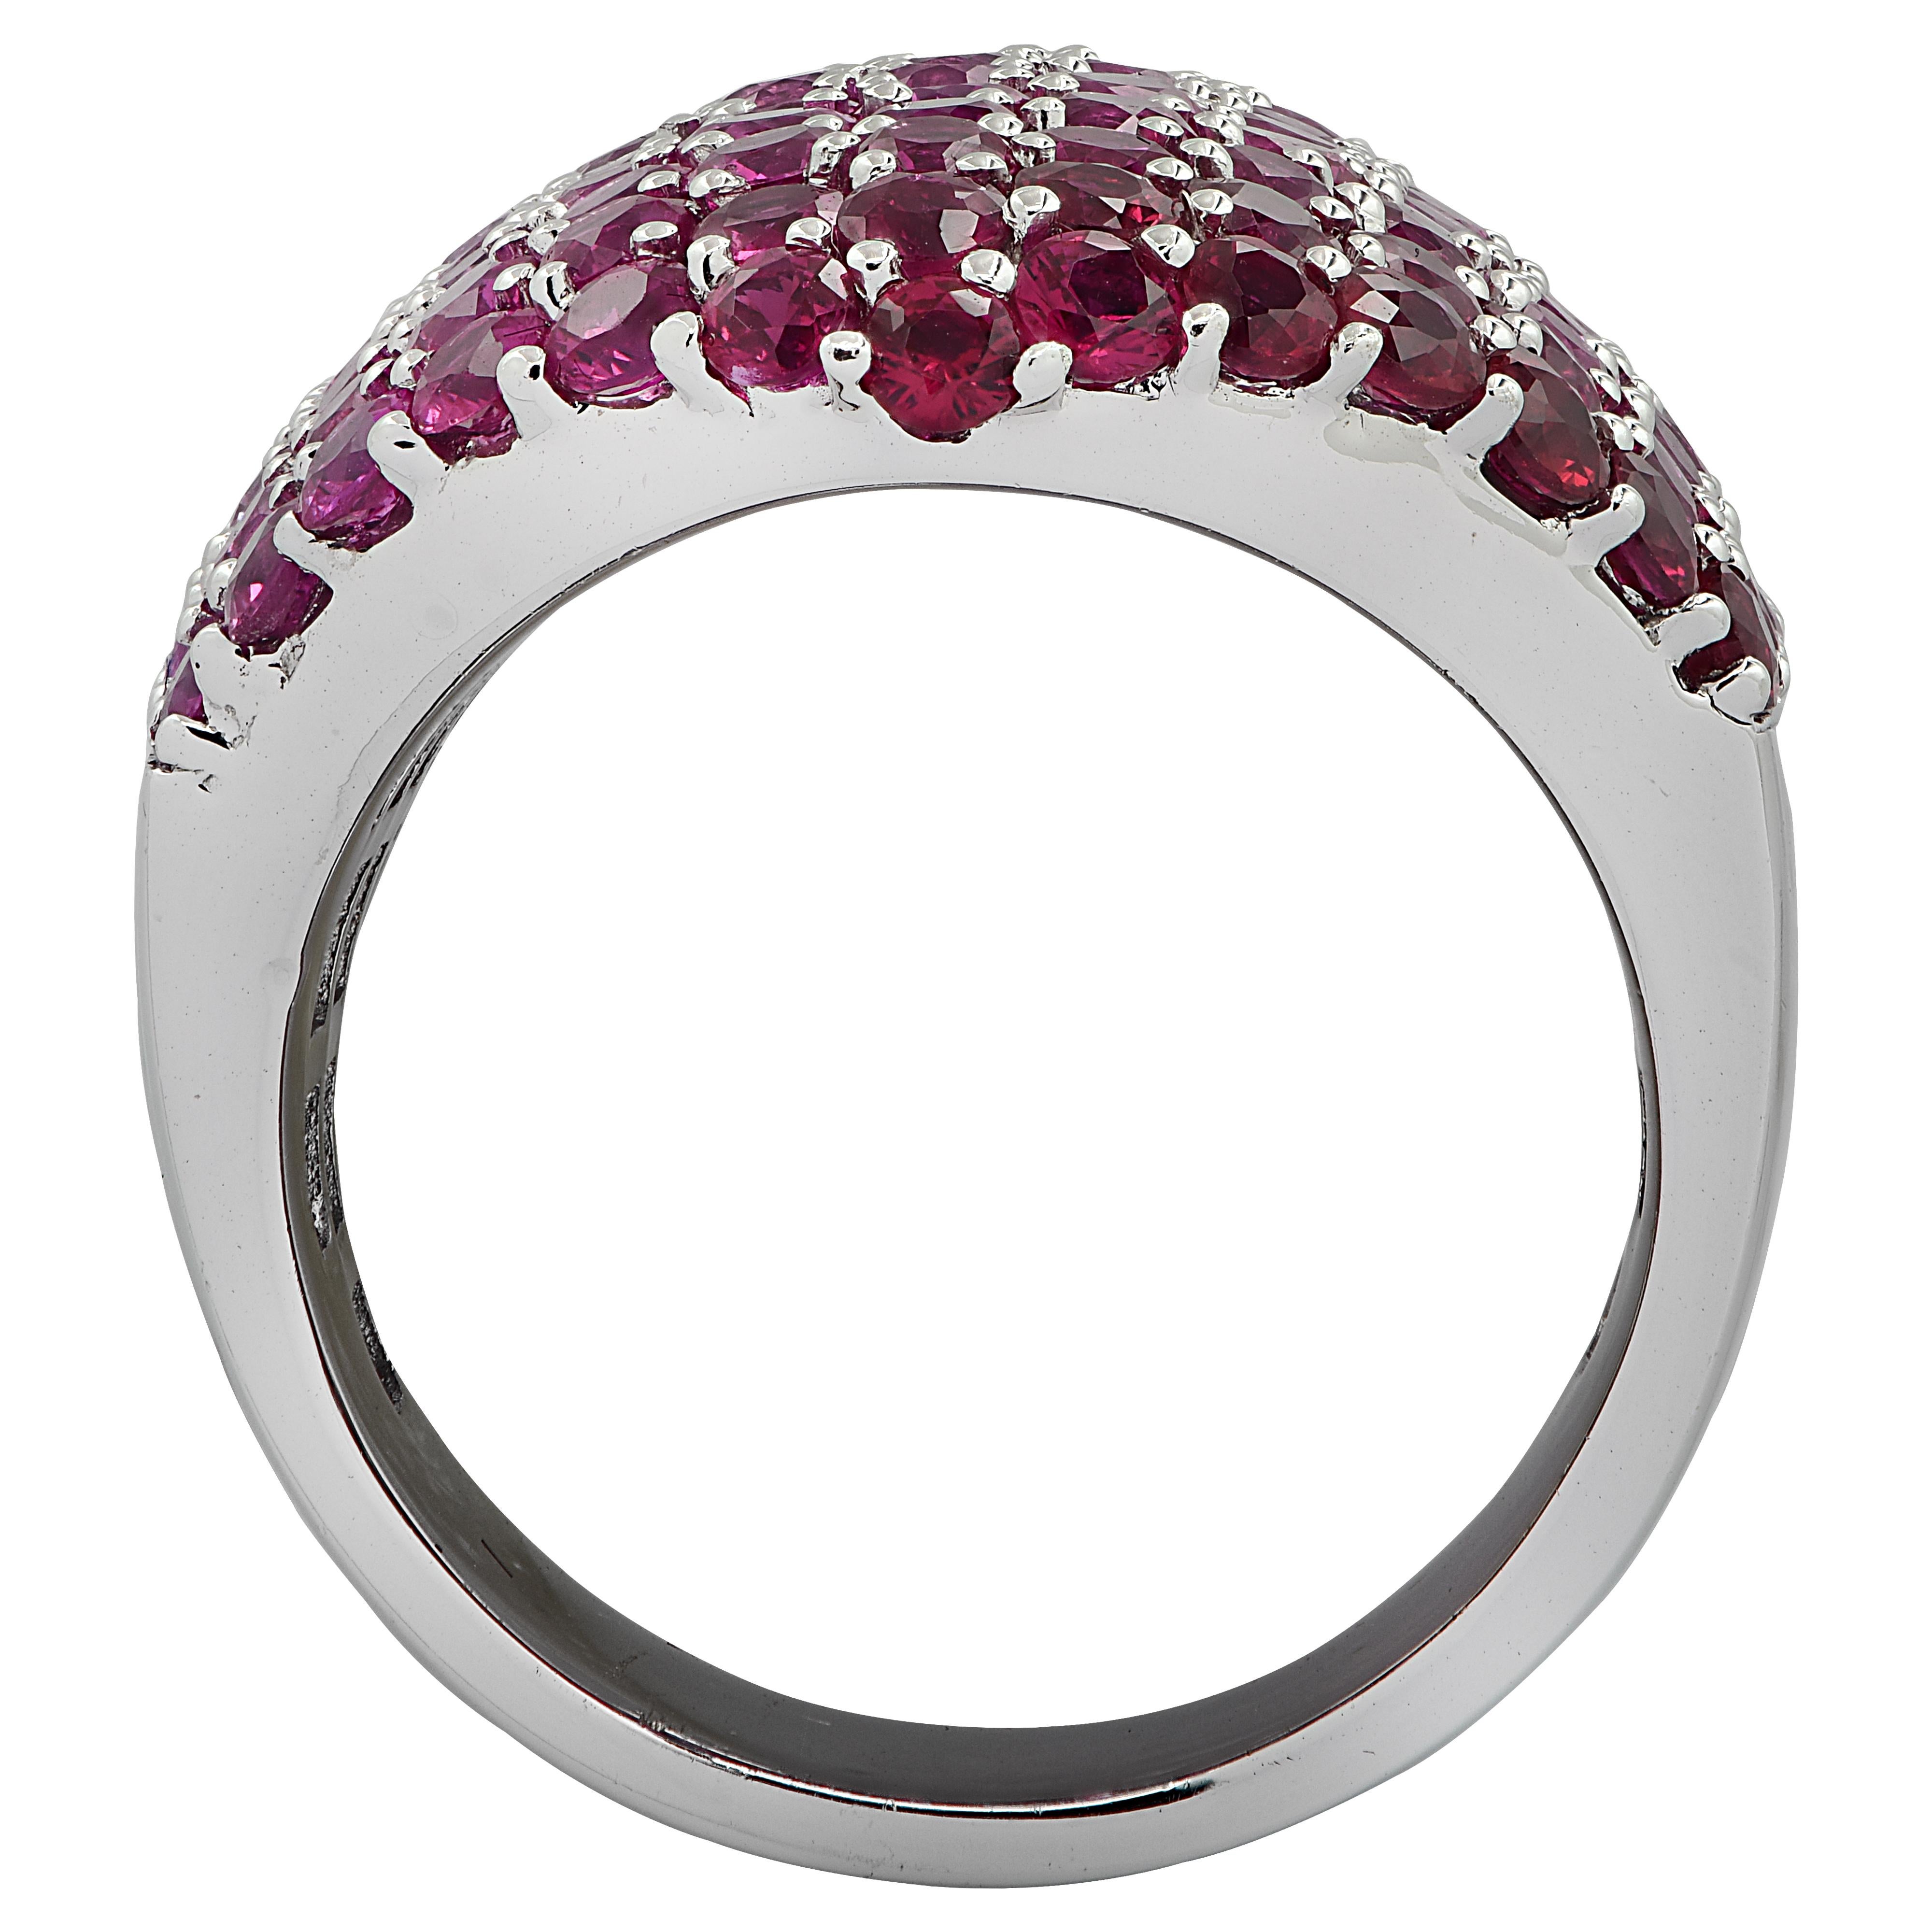 Striking cocktail ring finely crafted in 18 karat white gold, featuring round pink sapphires weighing approximately 6.52 carats total, and round rubies weighing approximately 1.6 carats total, saturating in color from very light pink to deep red.